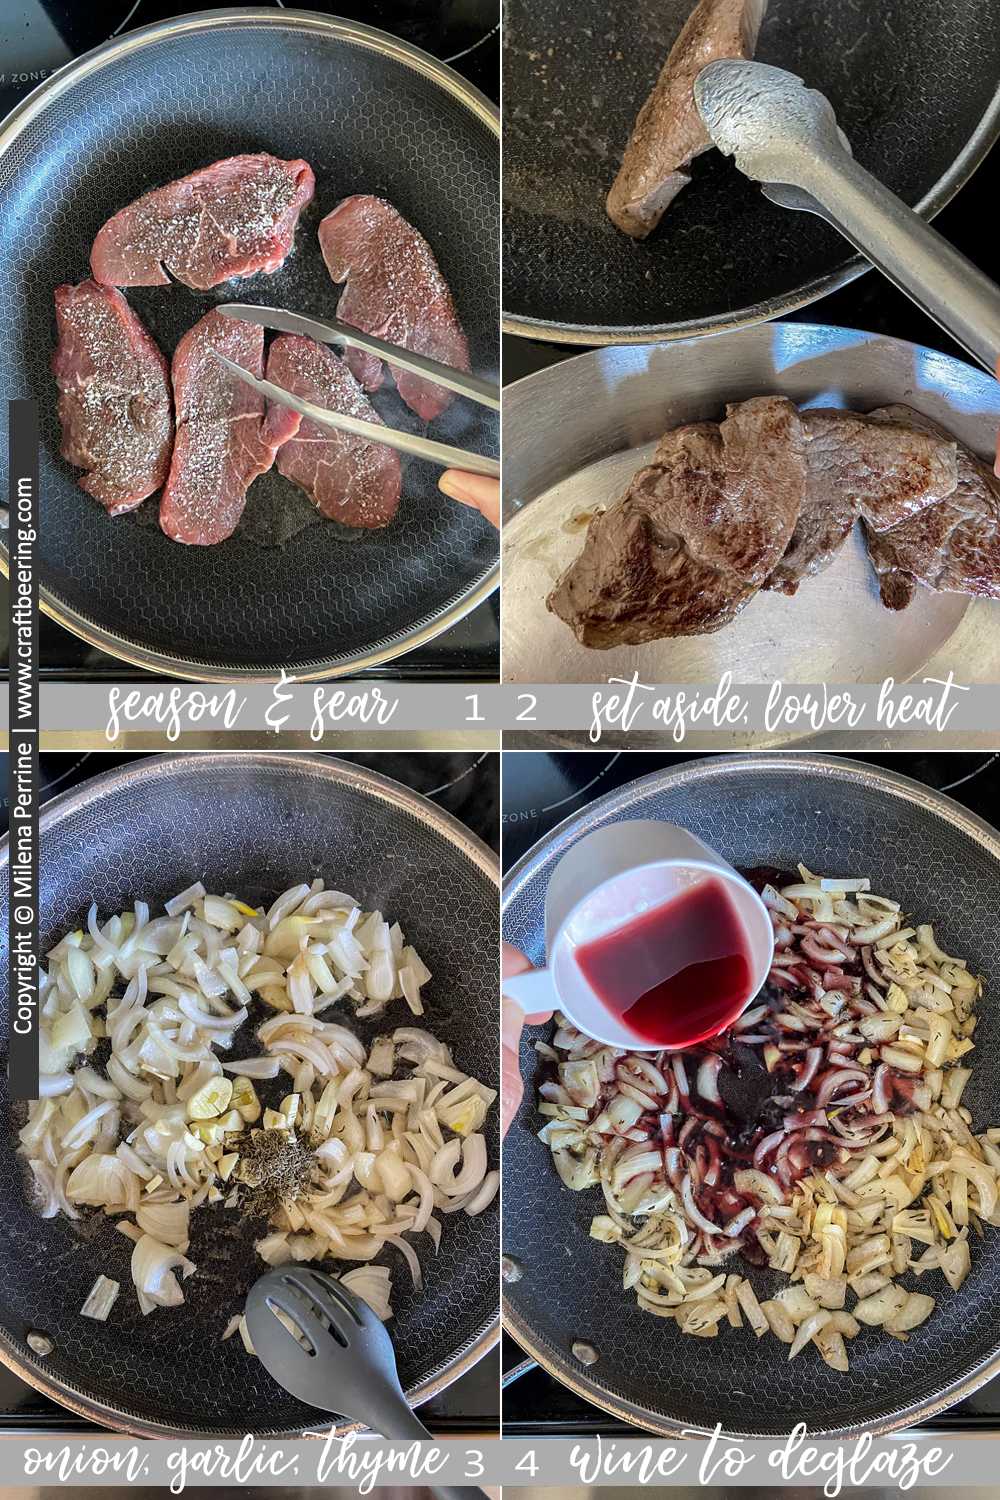 Step-by-step pictures to cook mock tender steak 1. 